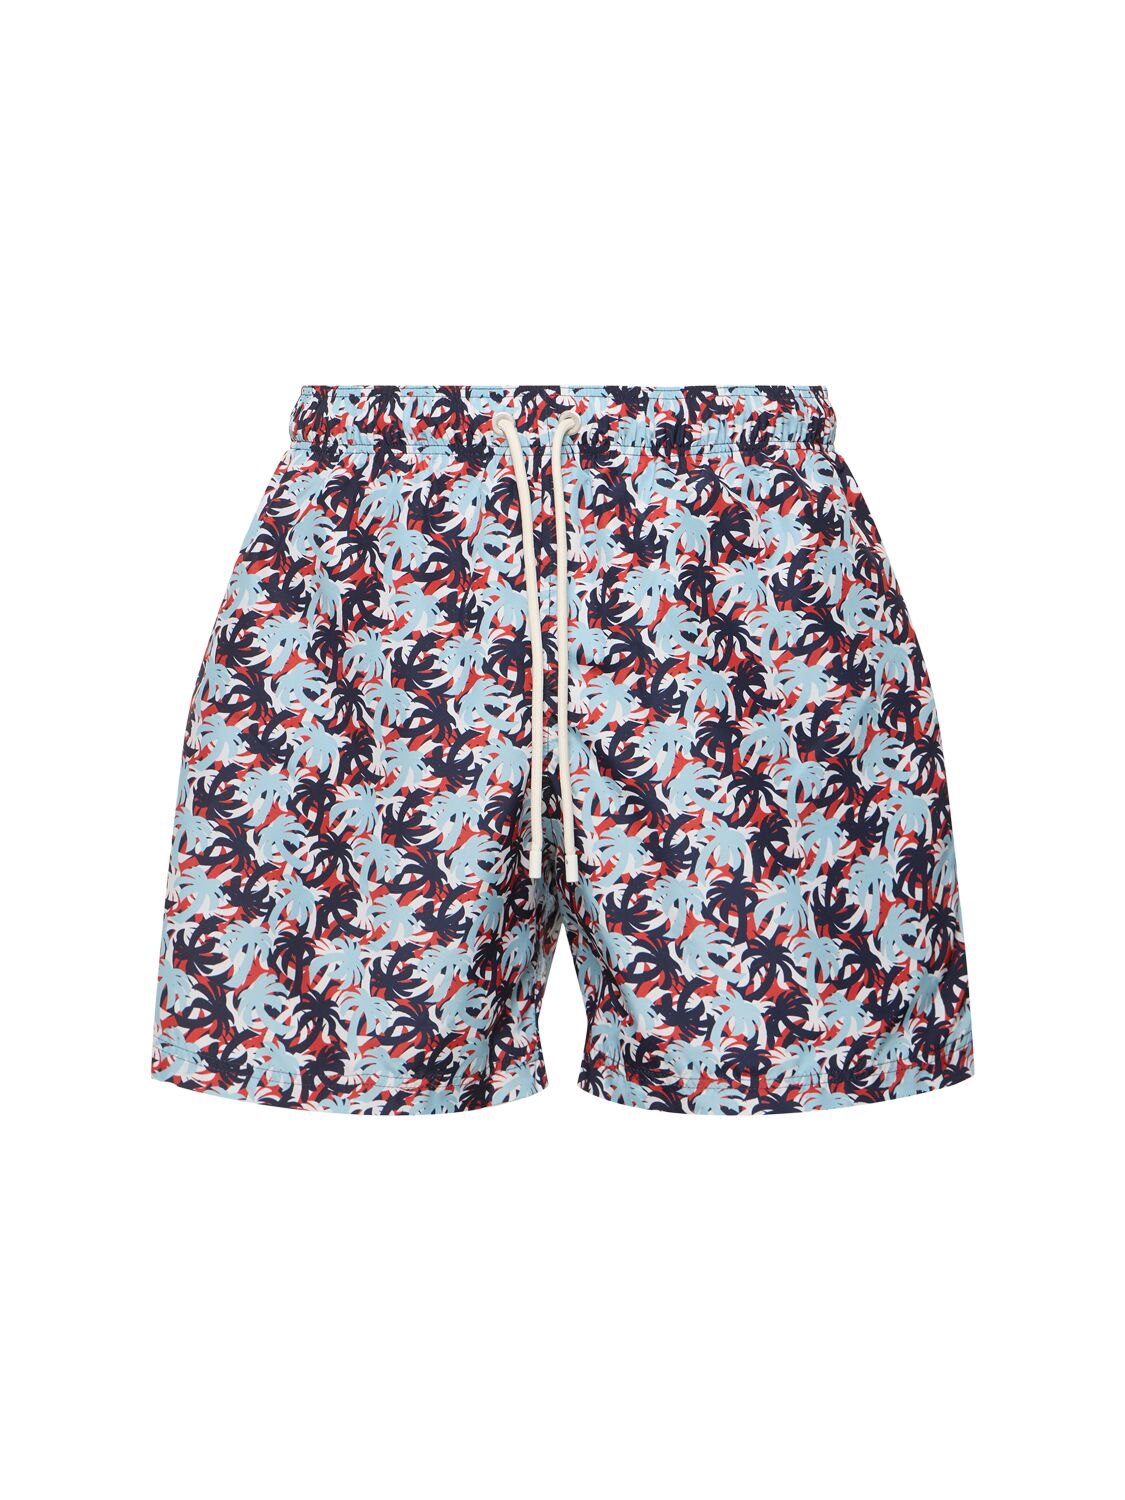 Palm Angels Palms Camouflage Tech Swim Shorts In Blue/red